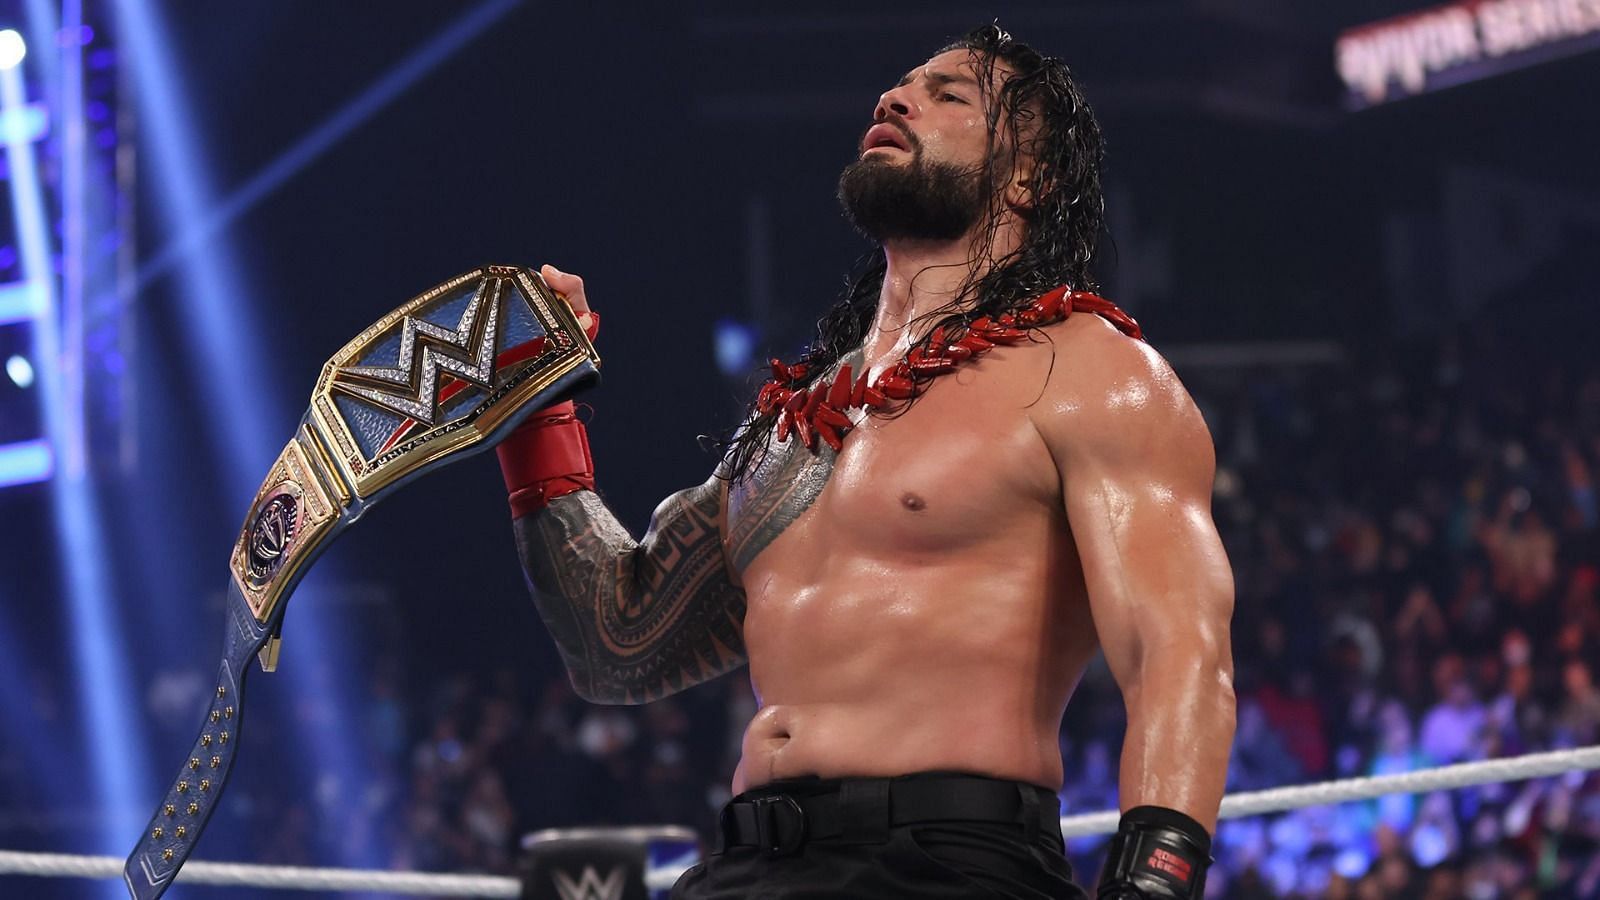 Roman Reigns can have his worst nightmare at WWE Survivor Series